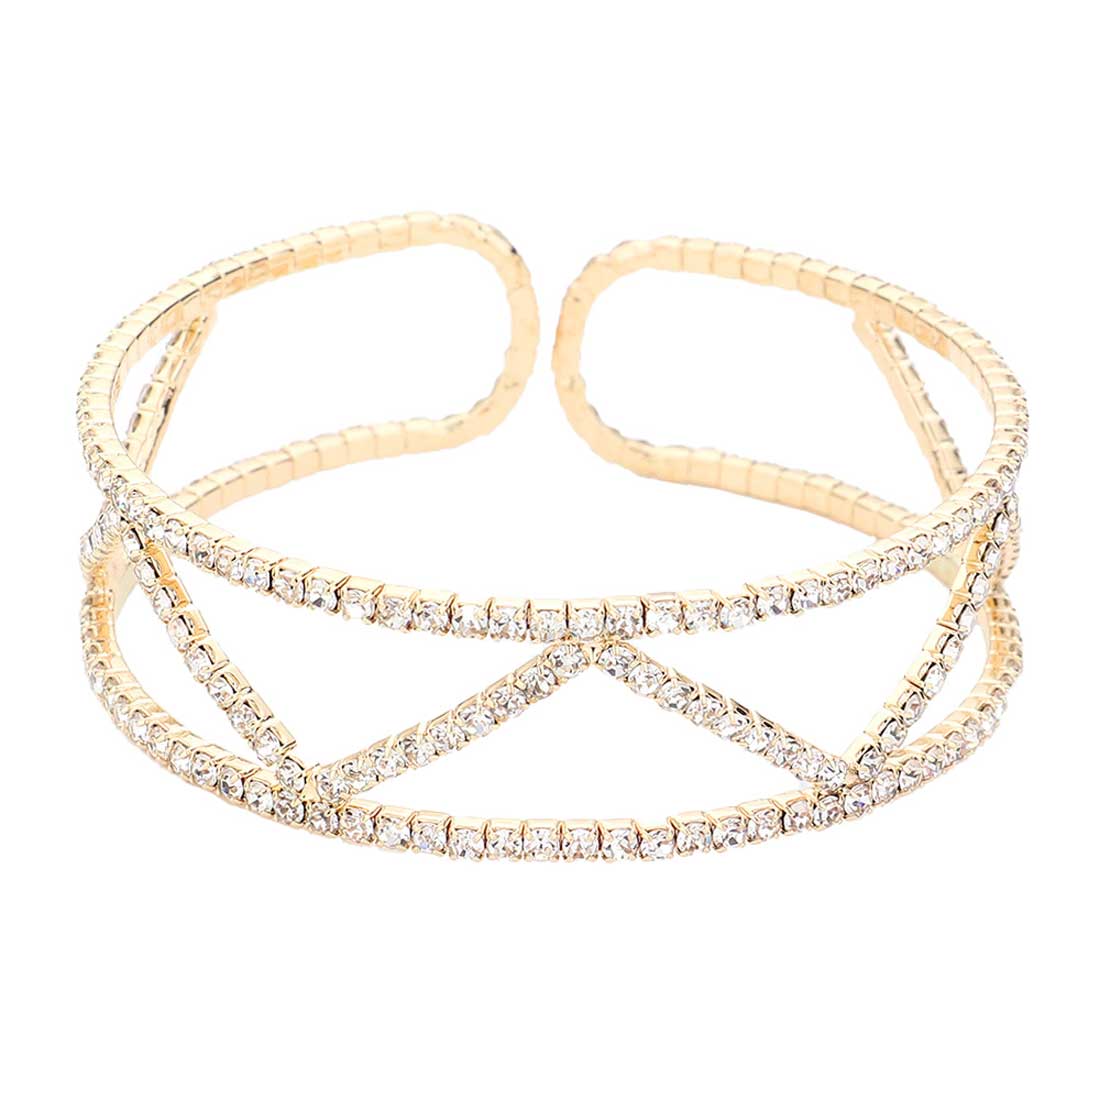 Gold Split Rhinestone Cuff Evening Bracelet. Get ready with this bracelet, Beautifully crafted design adds a gorgeous glow to any outfit. Jewelry that fits your lifestyle! Perfect Birthday Gift, Anniversary Gift, Mother's Day Gift, Anniversary Gift, Graduation Gift, Prom Jewelry, Just Because Gift, Thank you Gift.